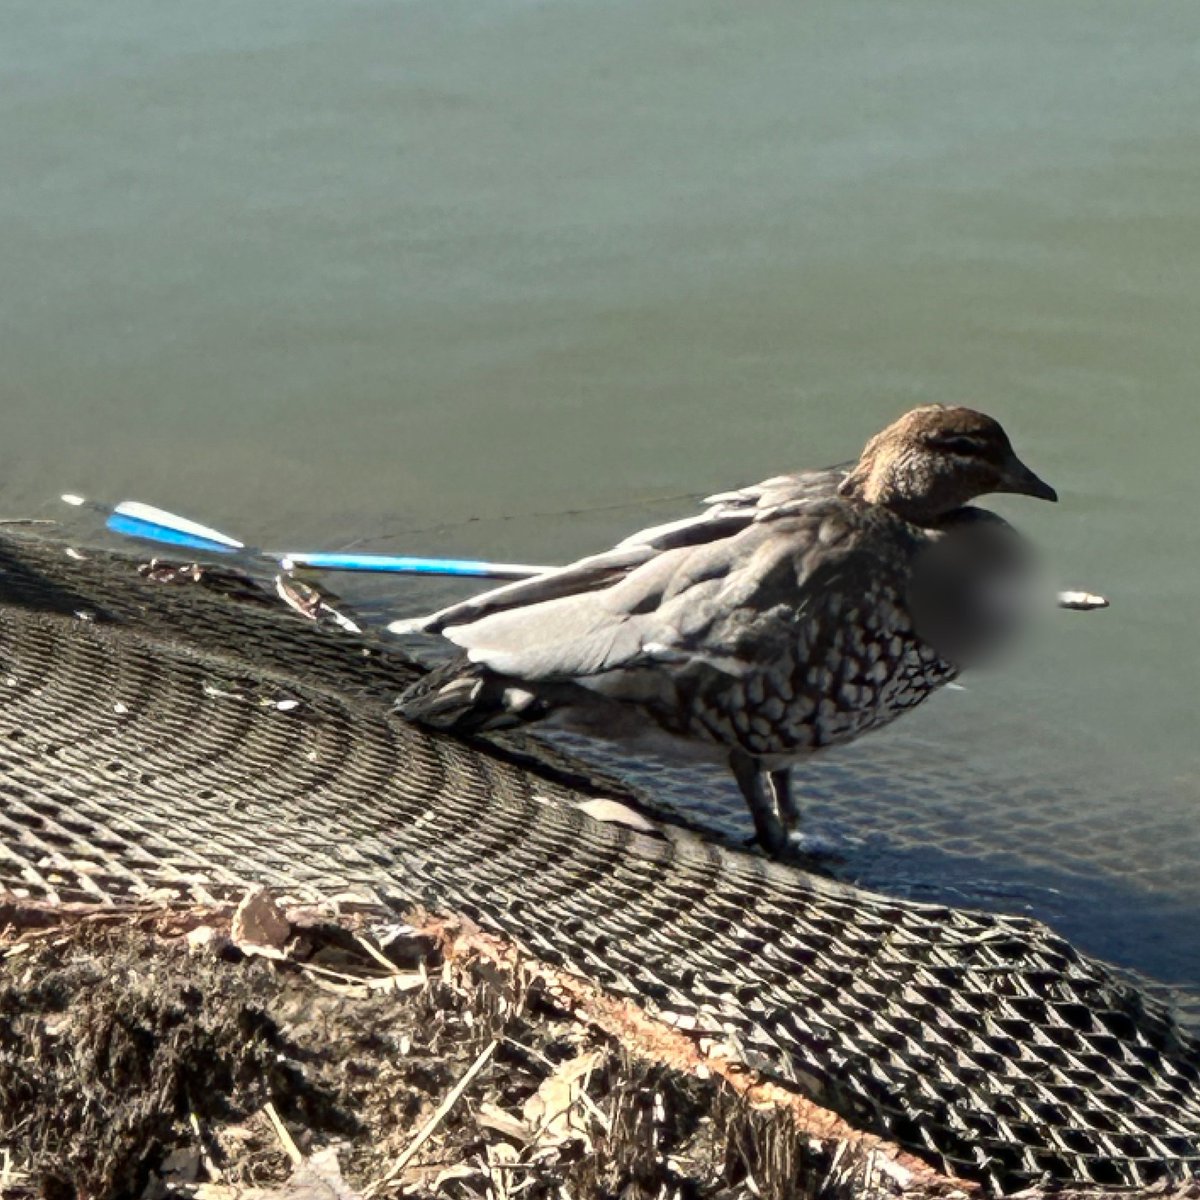 The @ConservationReg is seeking information from the public after a native wood duck was found shot with an arrow at the Mildura Marina on Saturday 10 June. crimestoppersvic.com.au/wildlife_crime… If you know anything, contact Crime Stoppers on 1800 333 000 or online at crimestoppersvic.com.au